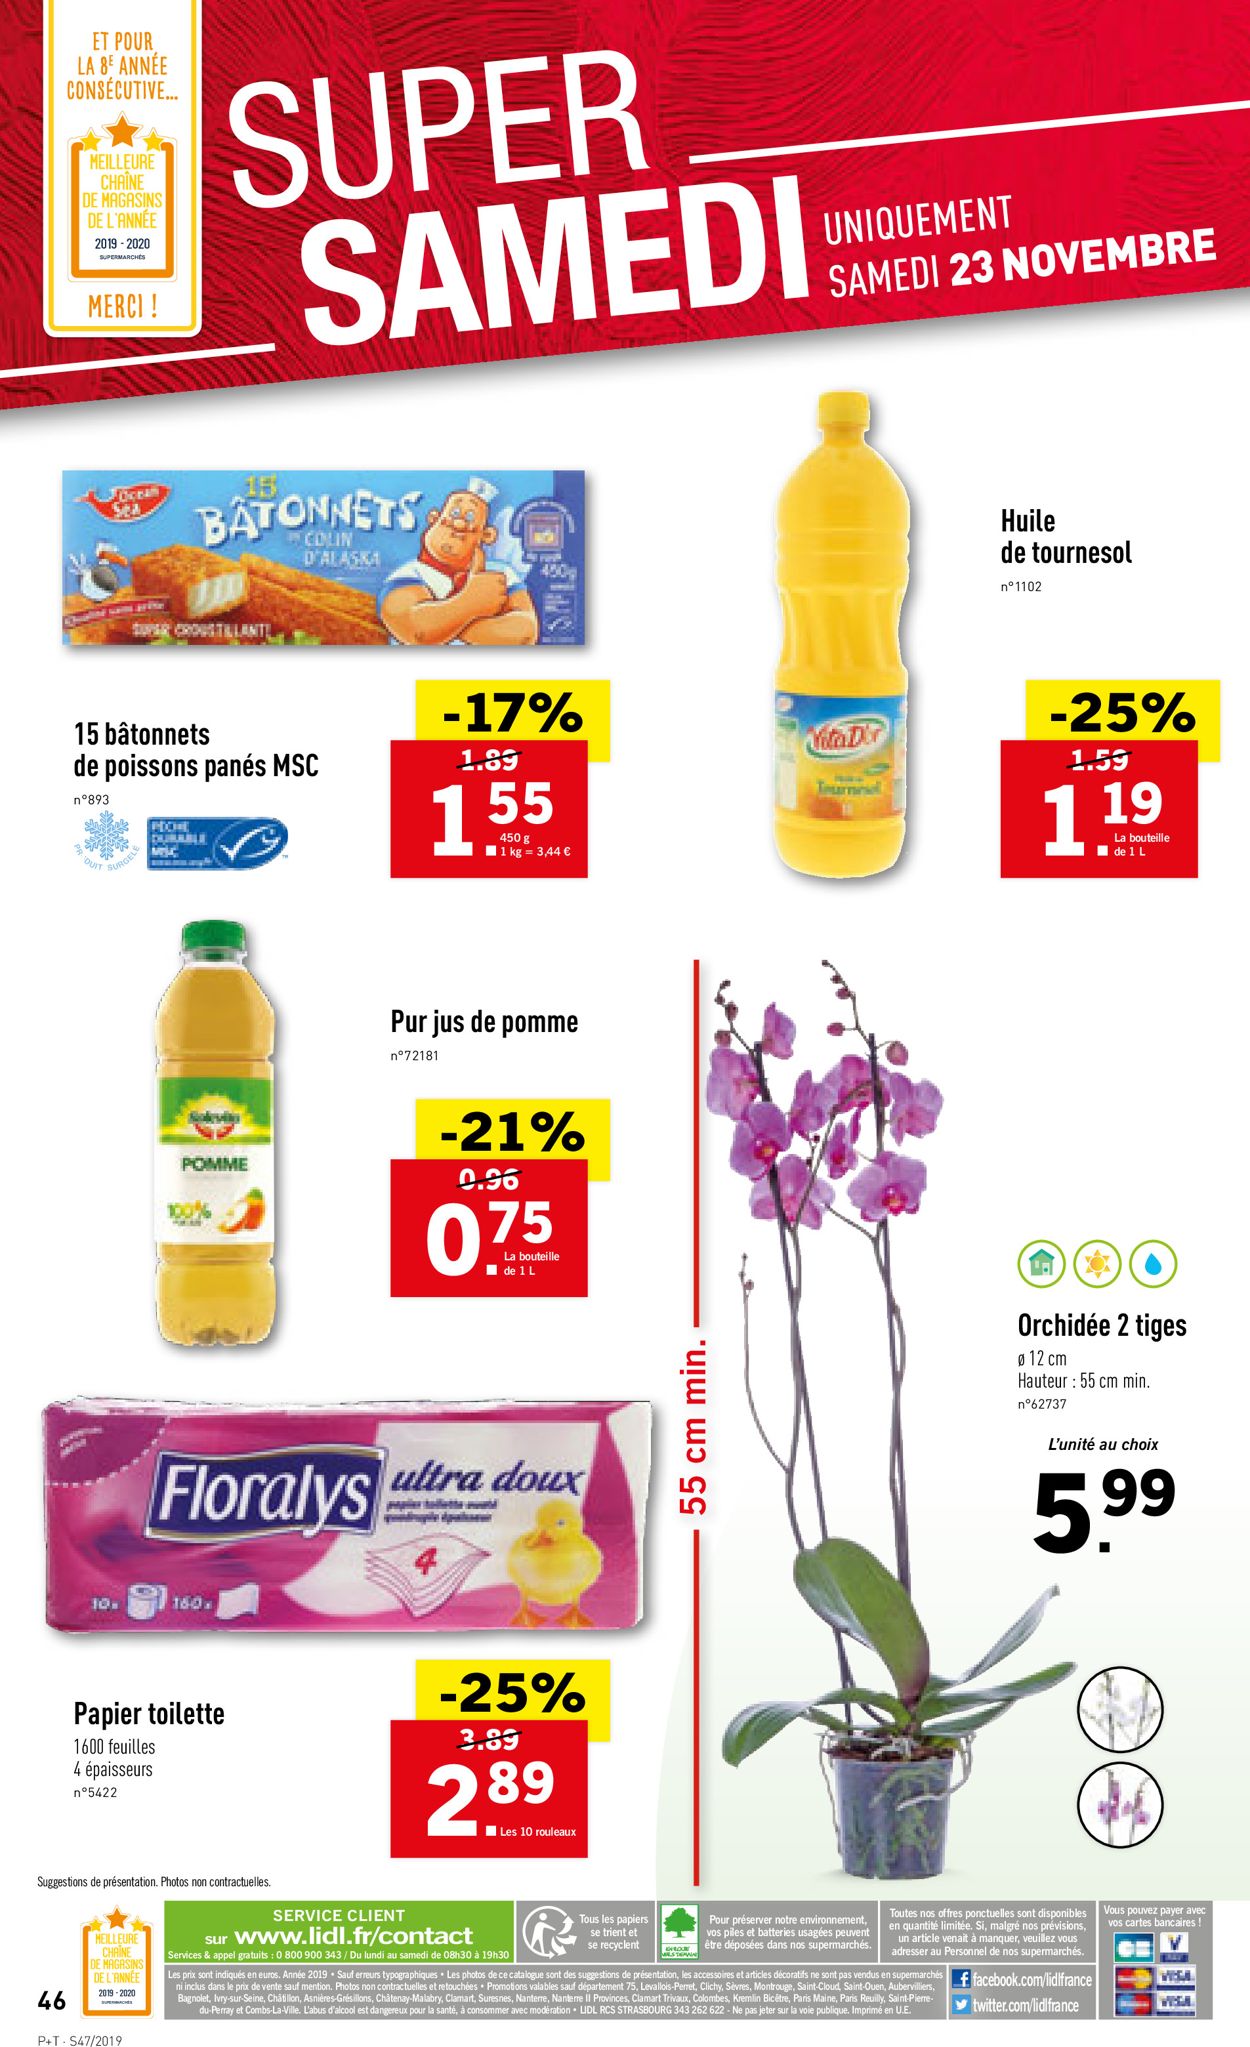 Lidl Catalogue - 20.11-26.11.2019 (Page 46)